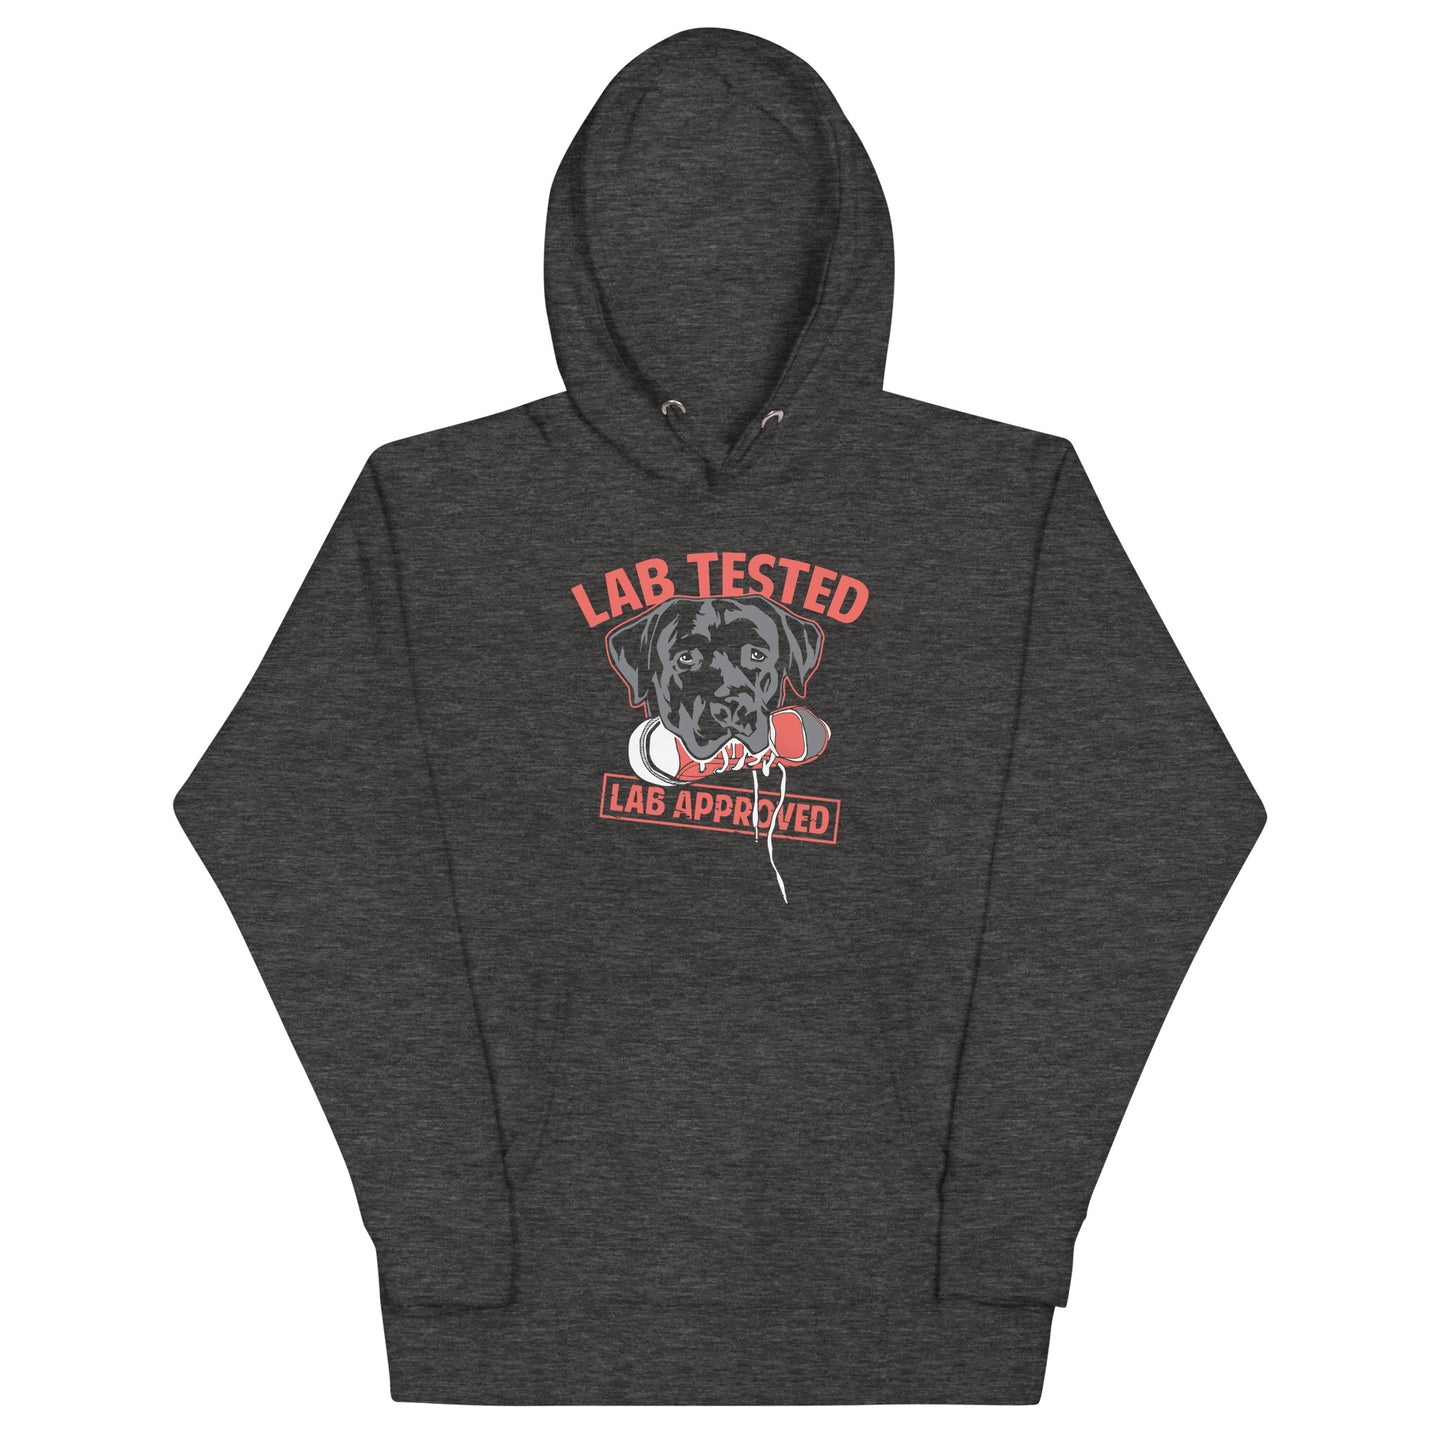 Lab Tested, Lab Approved Unisex Hoodie